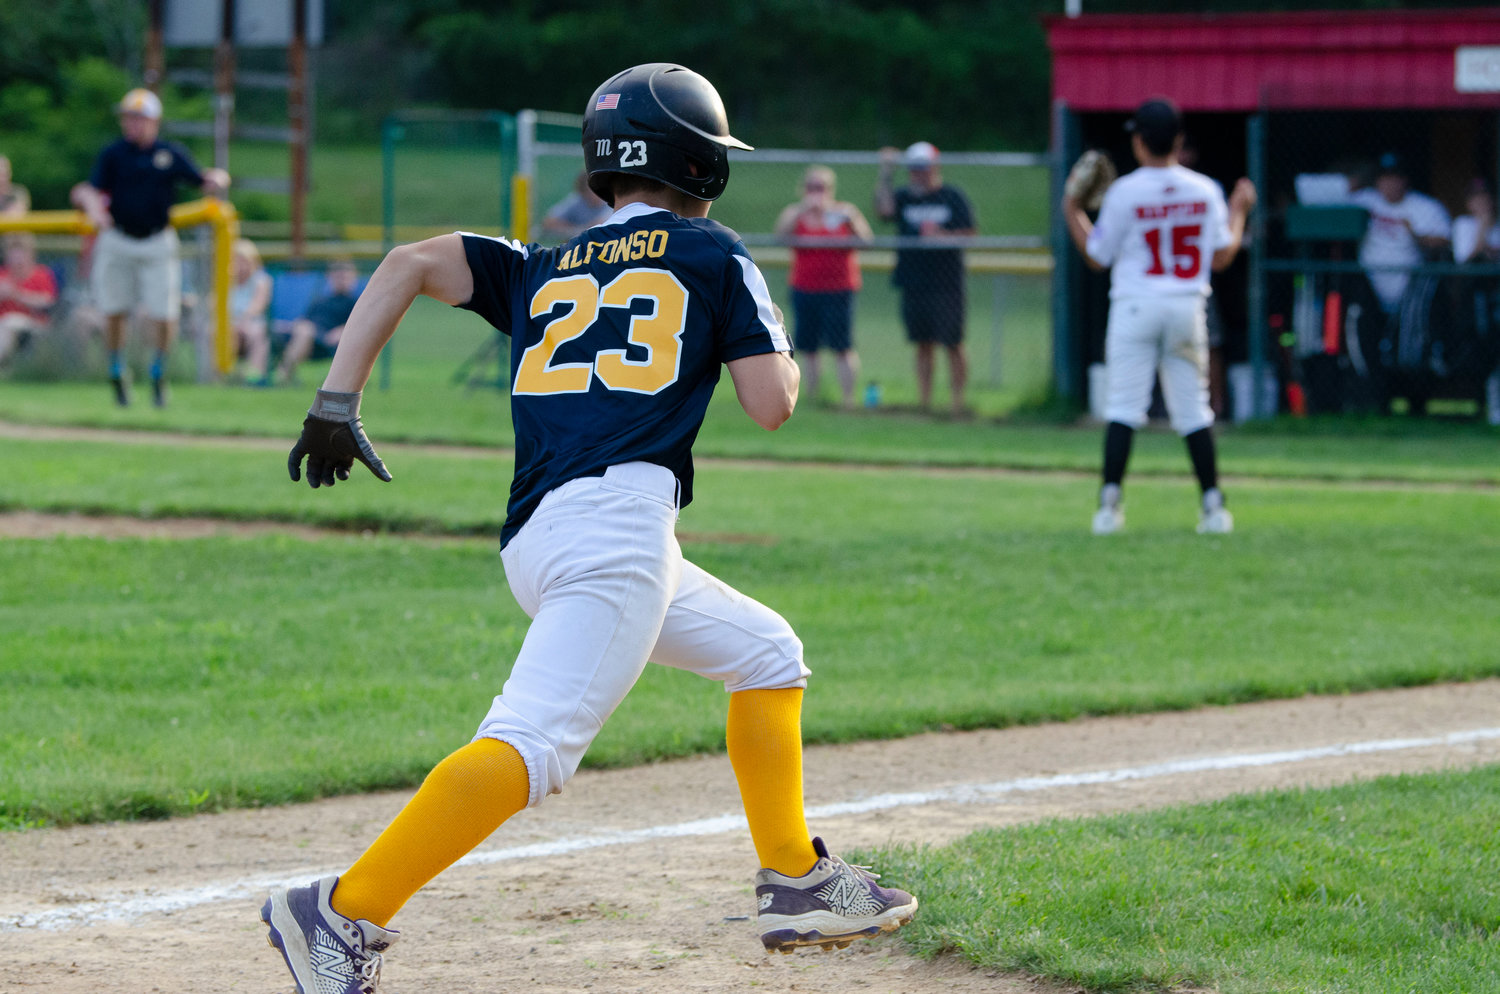 Barrington’s Henry Alfonso rounds third base and heads for home during the sixth inning of the first game of the District 2 finals against Riverside. Alfonso scored, giving Barrington all the runs they would need in the 2-0 victory.